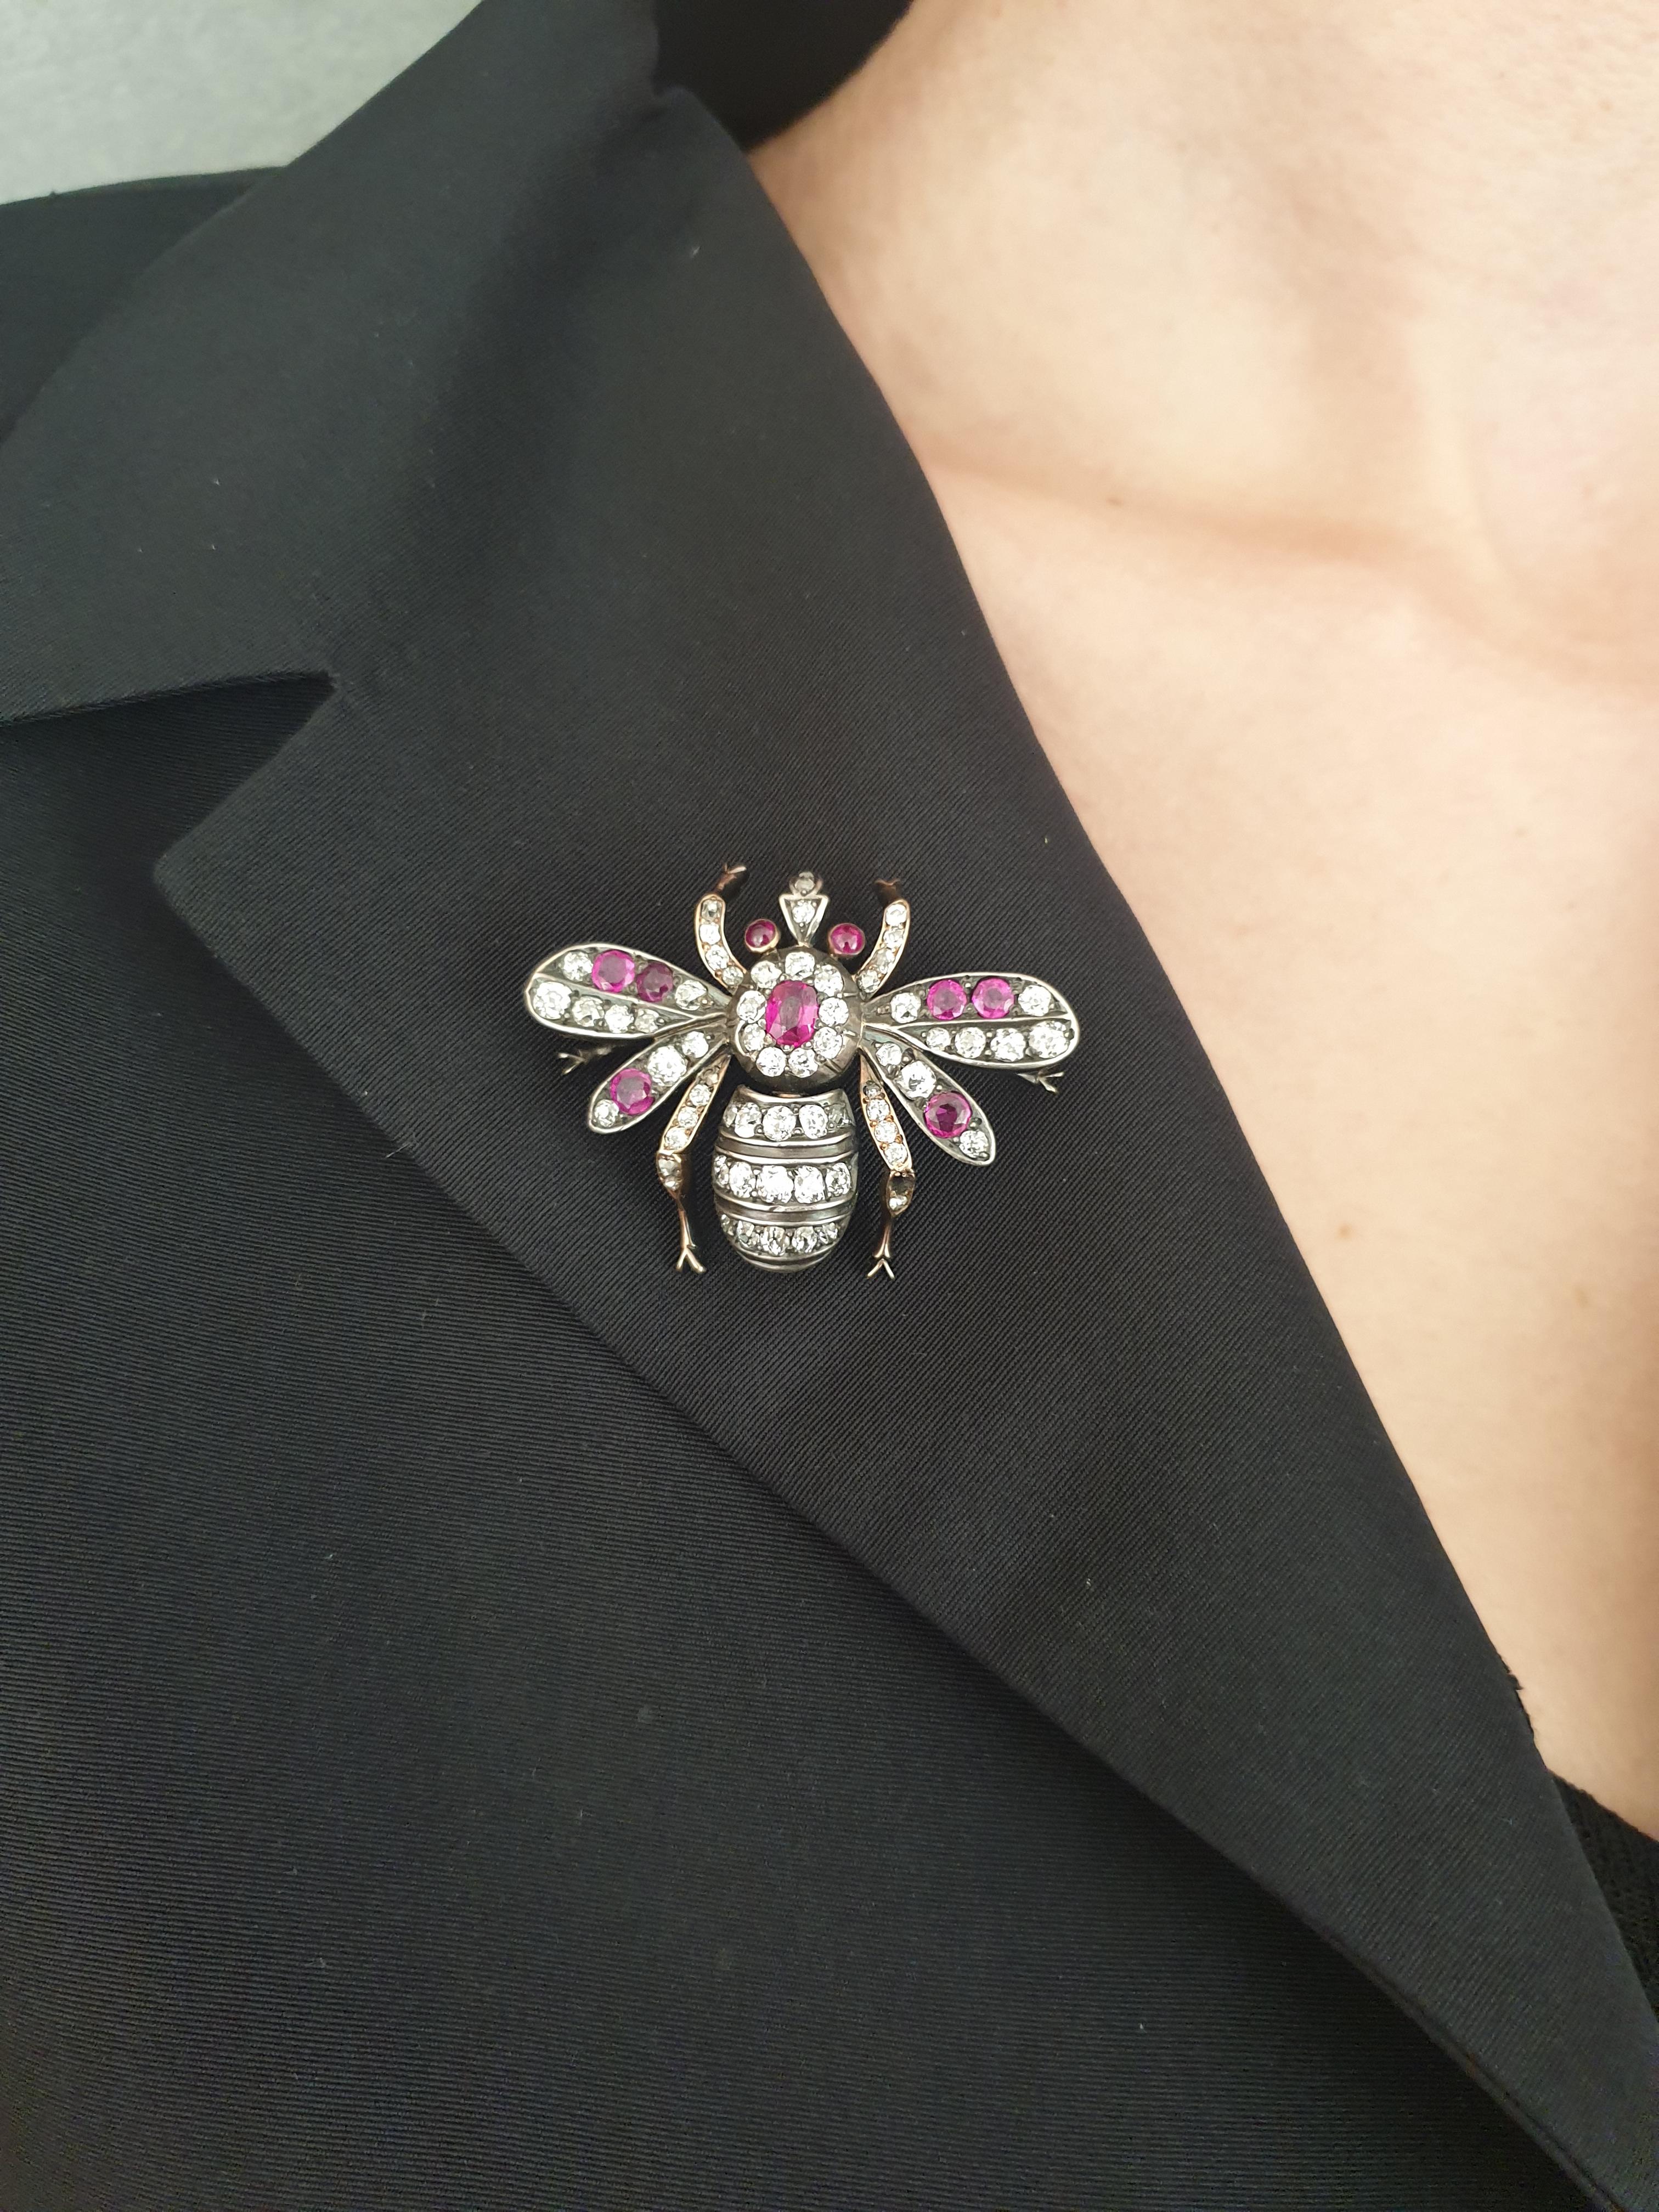 Old cut diamonds and Burma rubies insect brooch mounted in gold and silver.
Late 19th century.